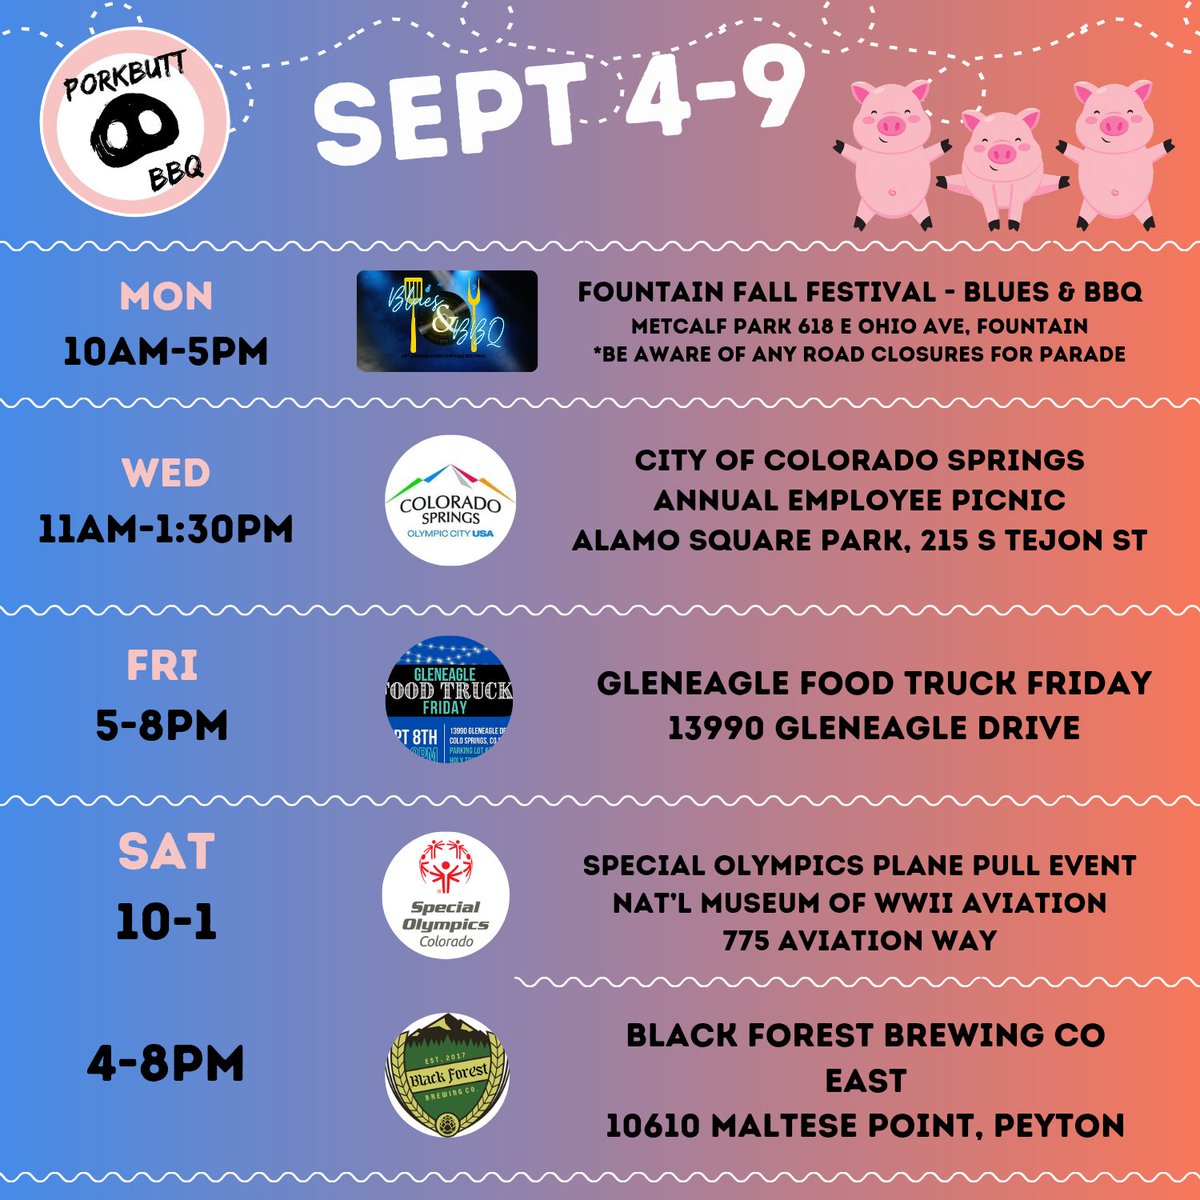 Happy Labor Day Weekend!  Here is where you can find us this week!

#BBQ #coloradosprings #fountaincolorado #gleneaglecolorado #specialolympics #planepull #Brewery #blackforestcolorado